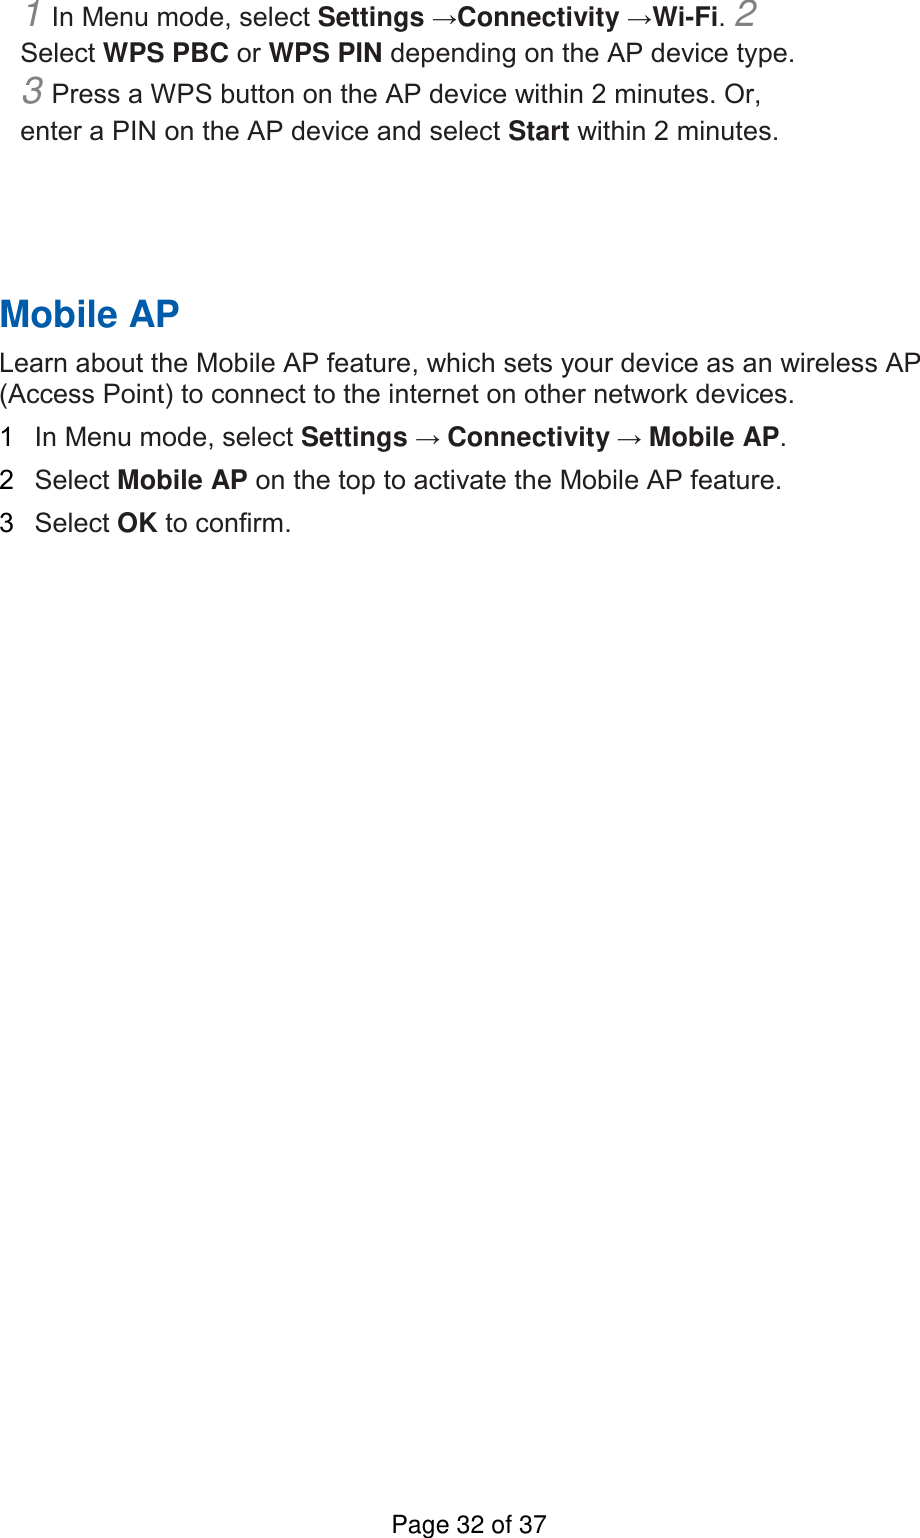 1 In Menu mode, select Settings →Connectivity →Wi-Fi. 2 Select WPS PBC or WPS PIN depending on the AP device type. 3 Press a WPS button on the AP device within 2 minutes. Or, enter a PIN on the AP device and select Start within 2 minutes.       Mobile AP   Learn about the Mobile AP feature, which sets your device as an wireless AP (Access Point) to connect to the internet on other network devices.   1  In Menu mode, select Settings → Connectivity → Mobile AP.   2  Select Mobile AP on the top to activate the Mobile AP feature.   3  Select OK to confirm.    Page 32 of 37